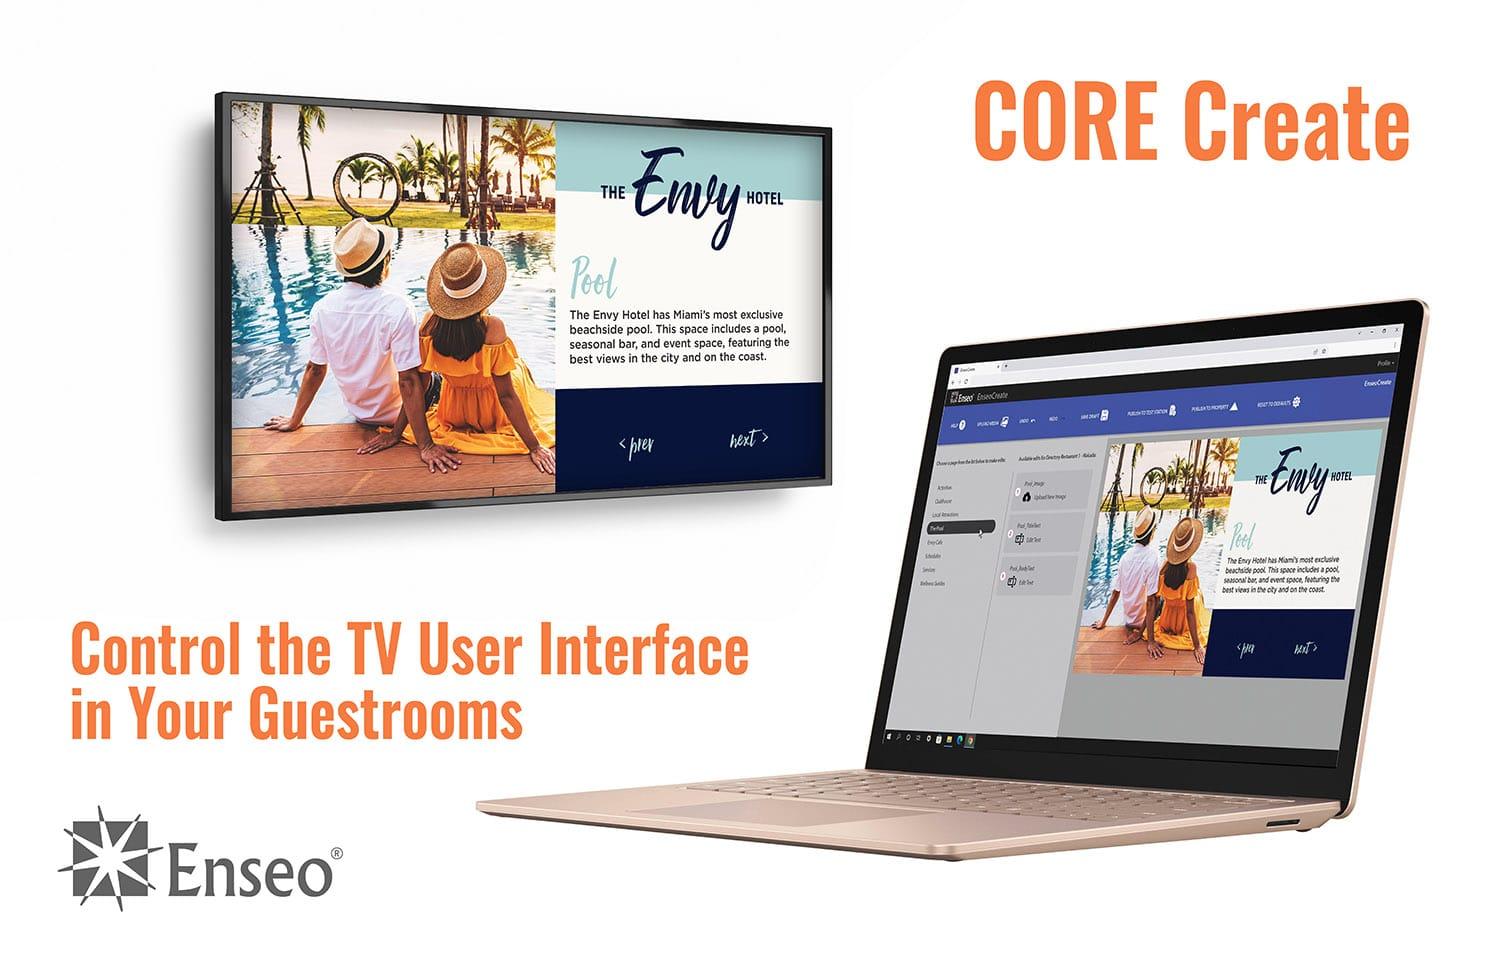 CORE Create running on a laptop and TV accompanied with the text, "Control the TV User Interface in Your Guestrooms."